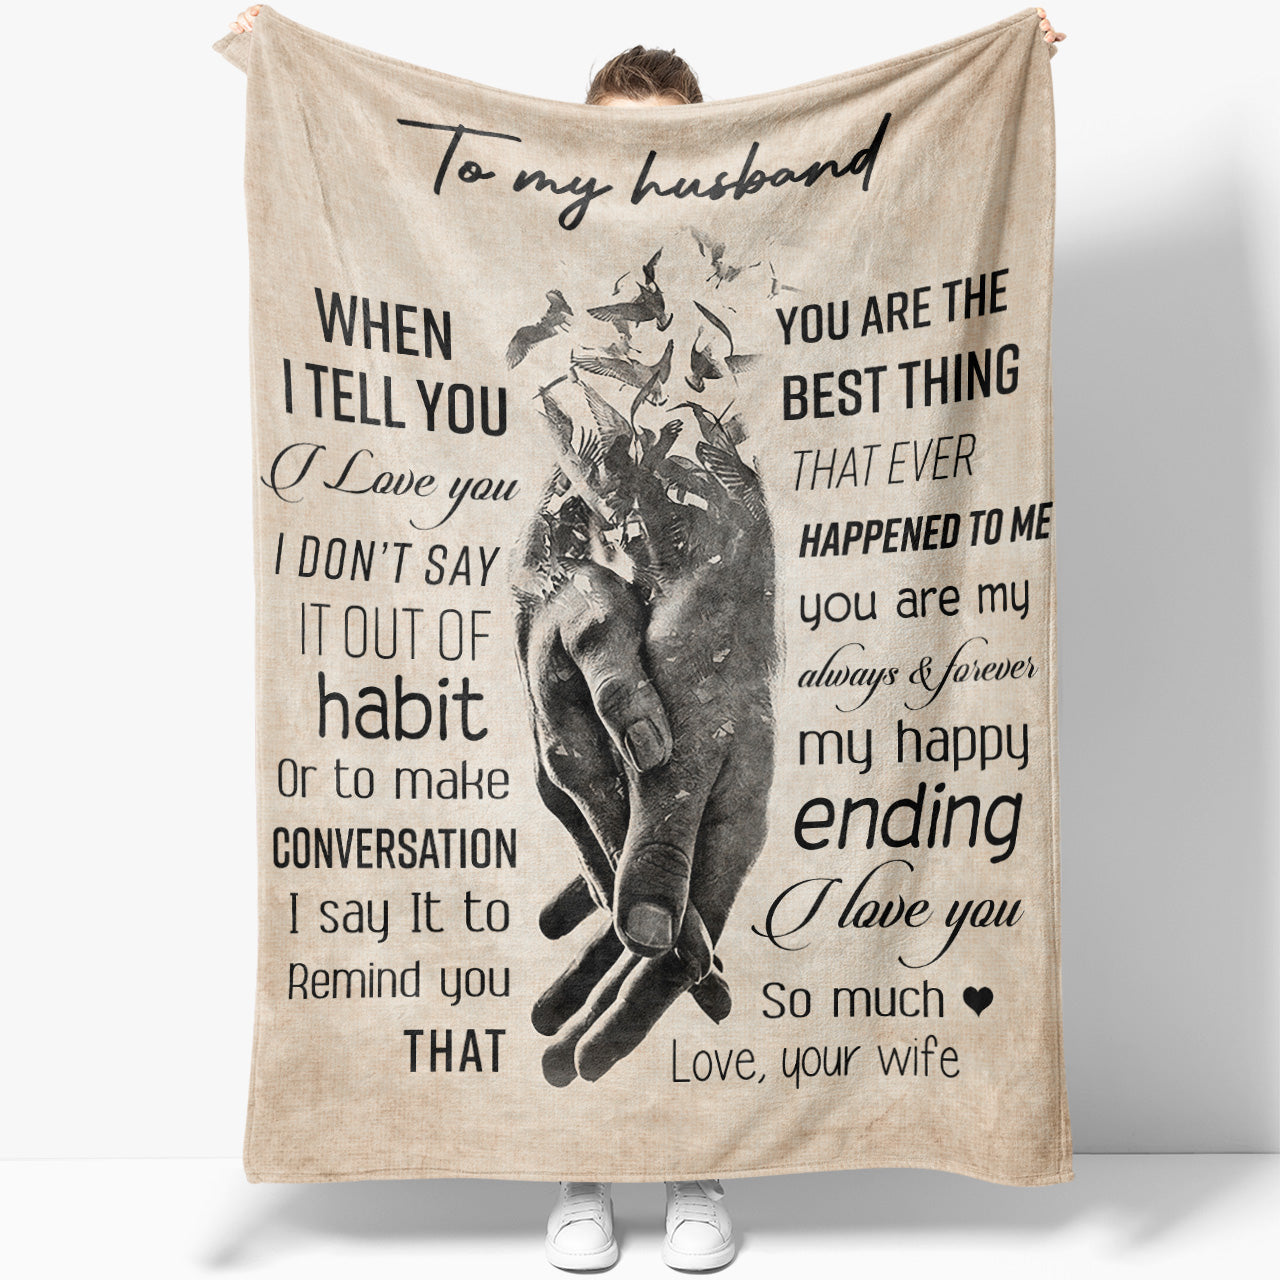 Blanket Gift Ideas For Husband, When I Tell You Love You Blanket